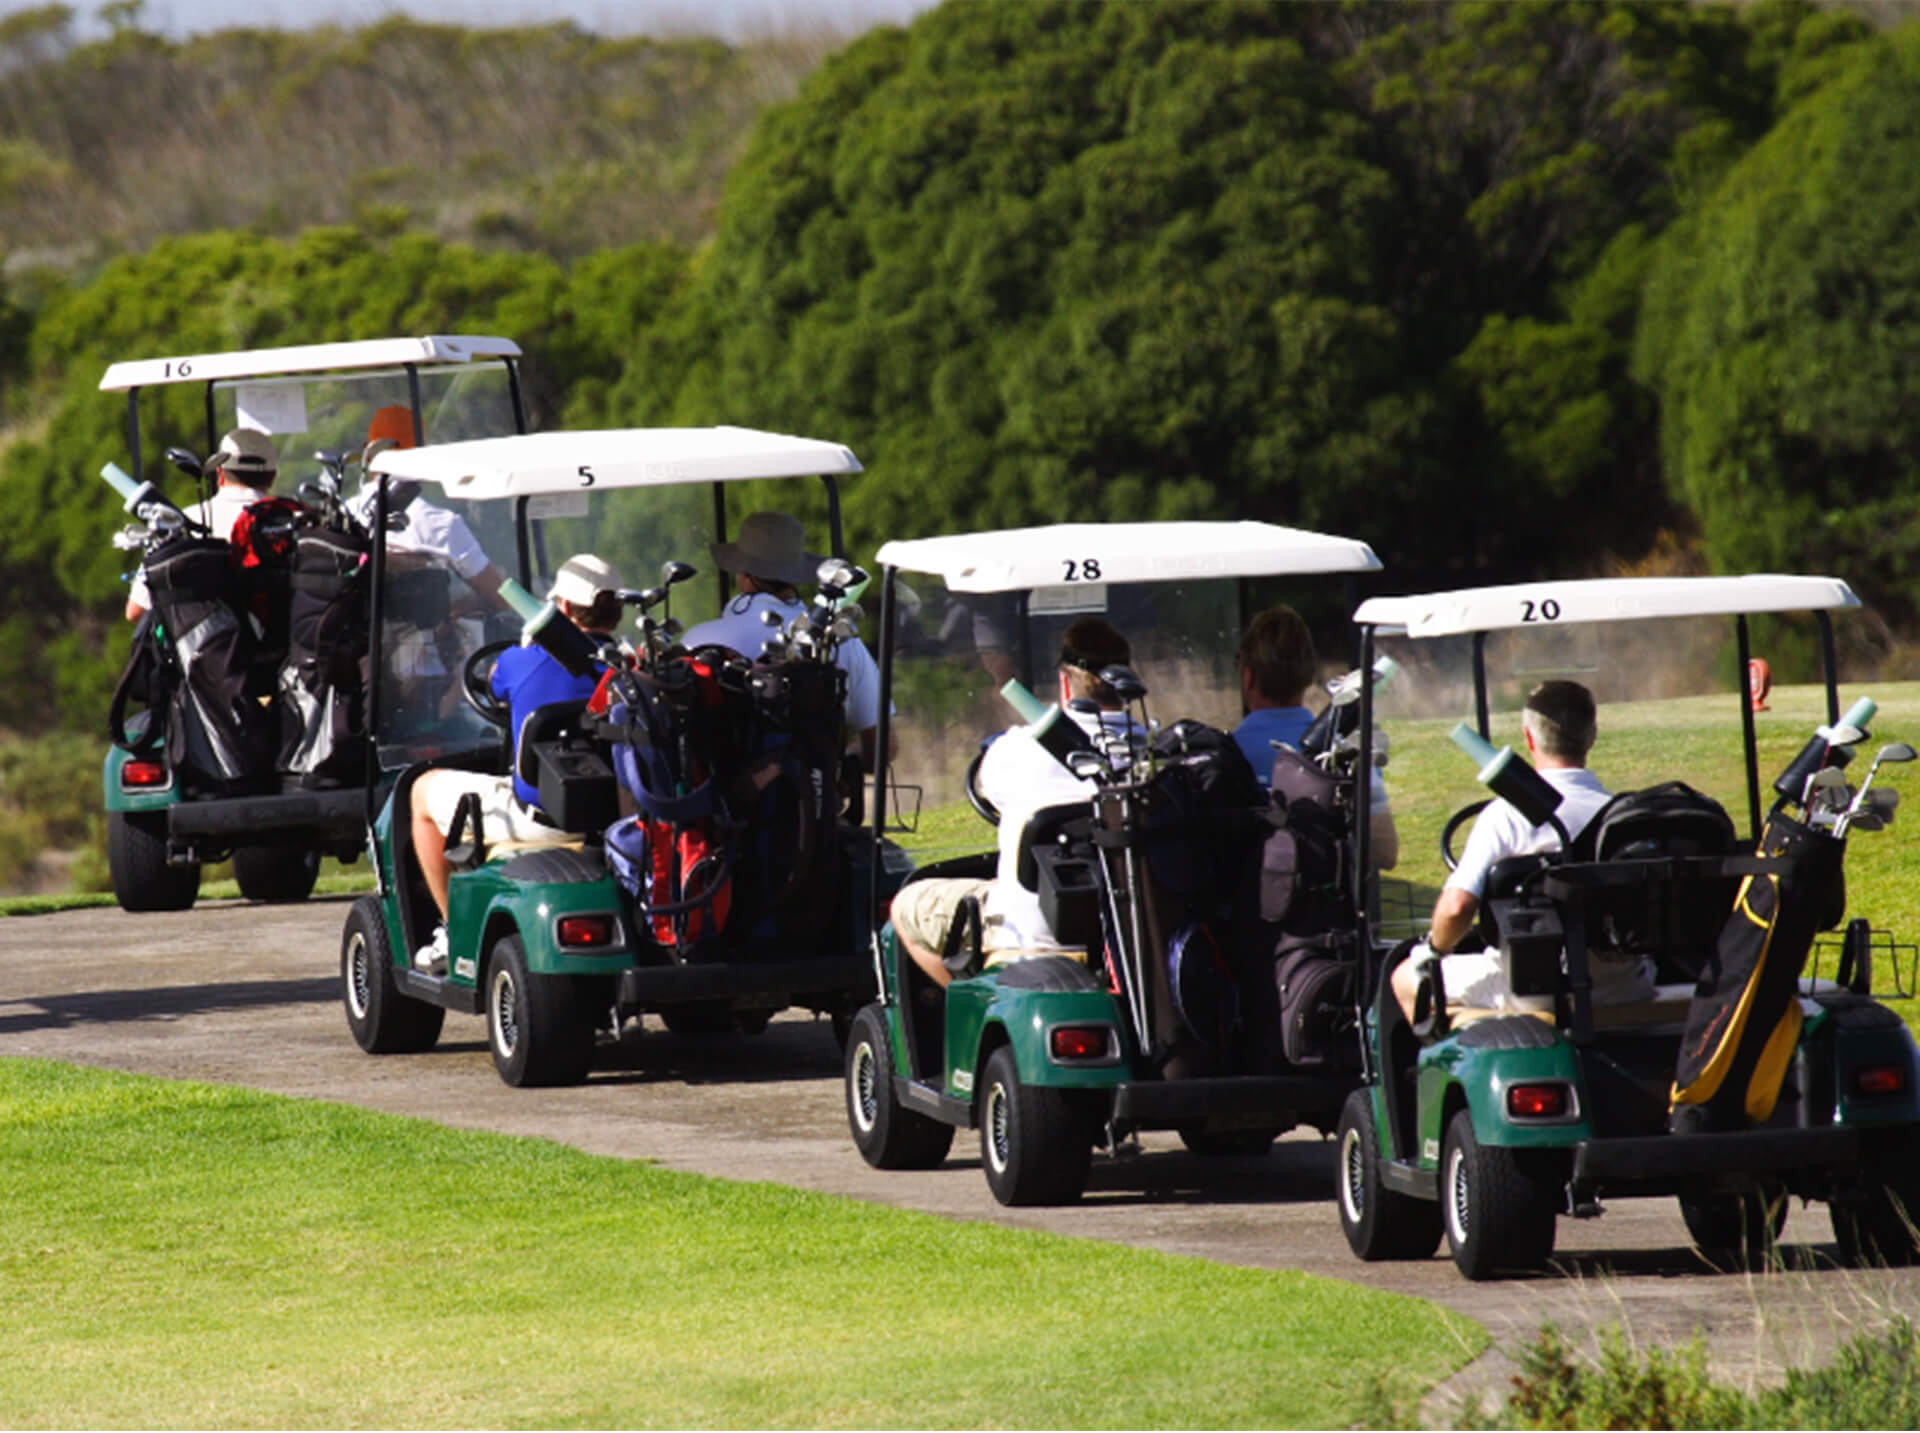 A group of golf carts parked at the westside golf club, supported by the Guildford Hotel.